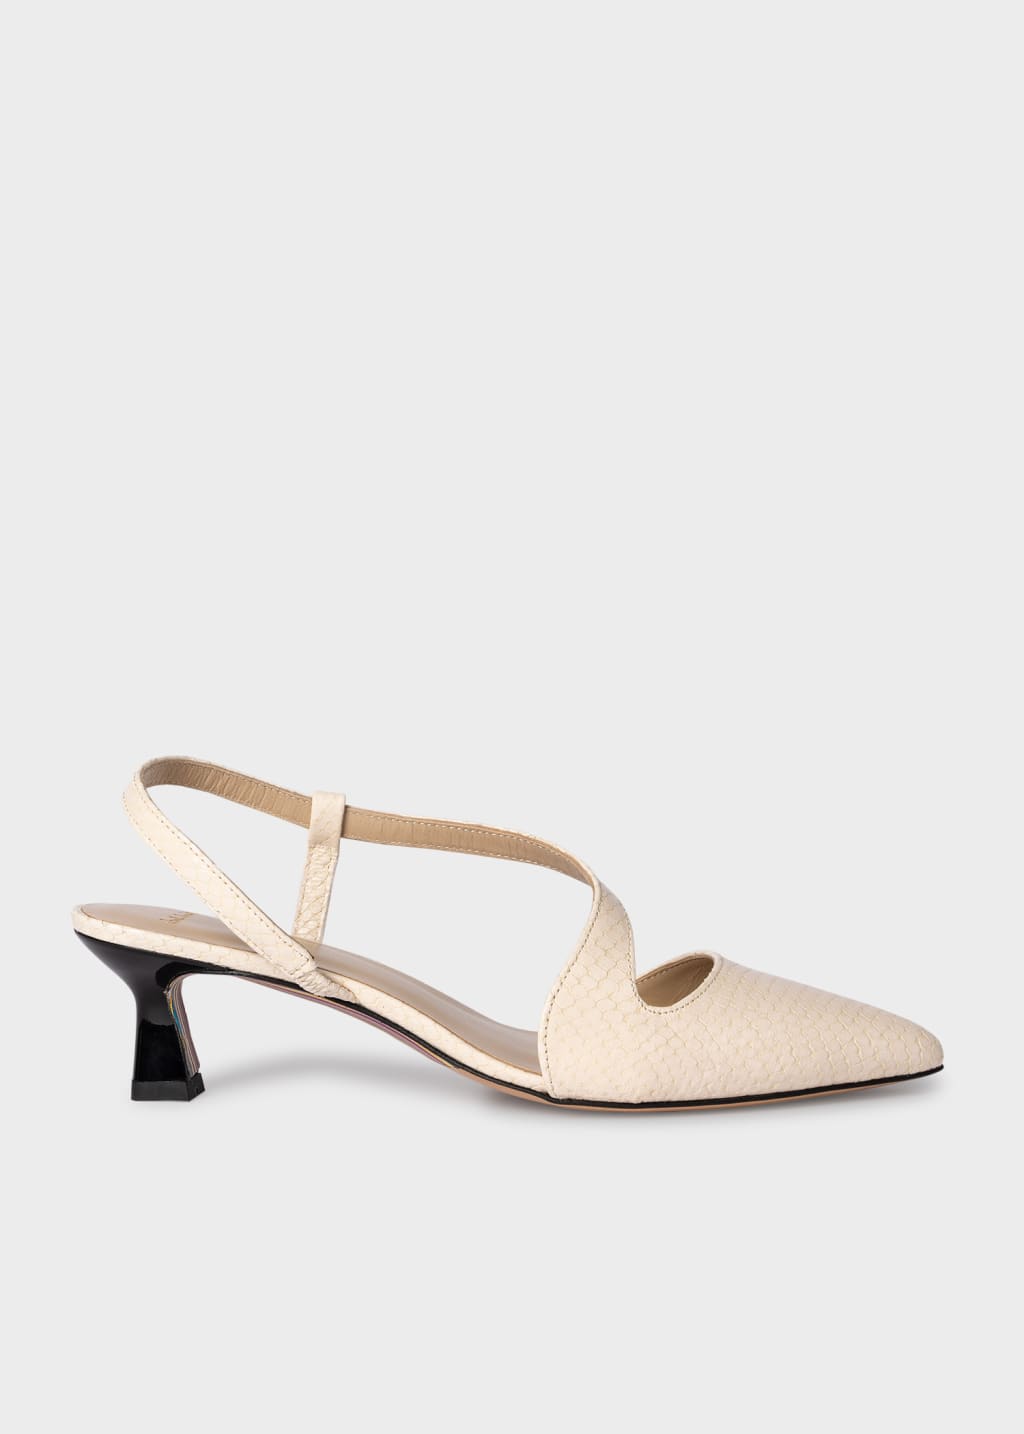 Side View - Women's Sand 'Cloudy' Suede Heels Paul Smith